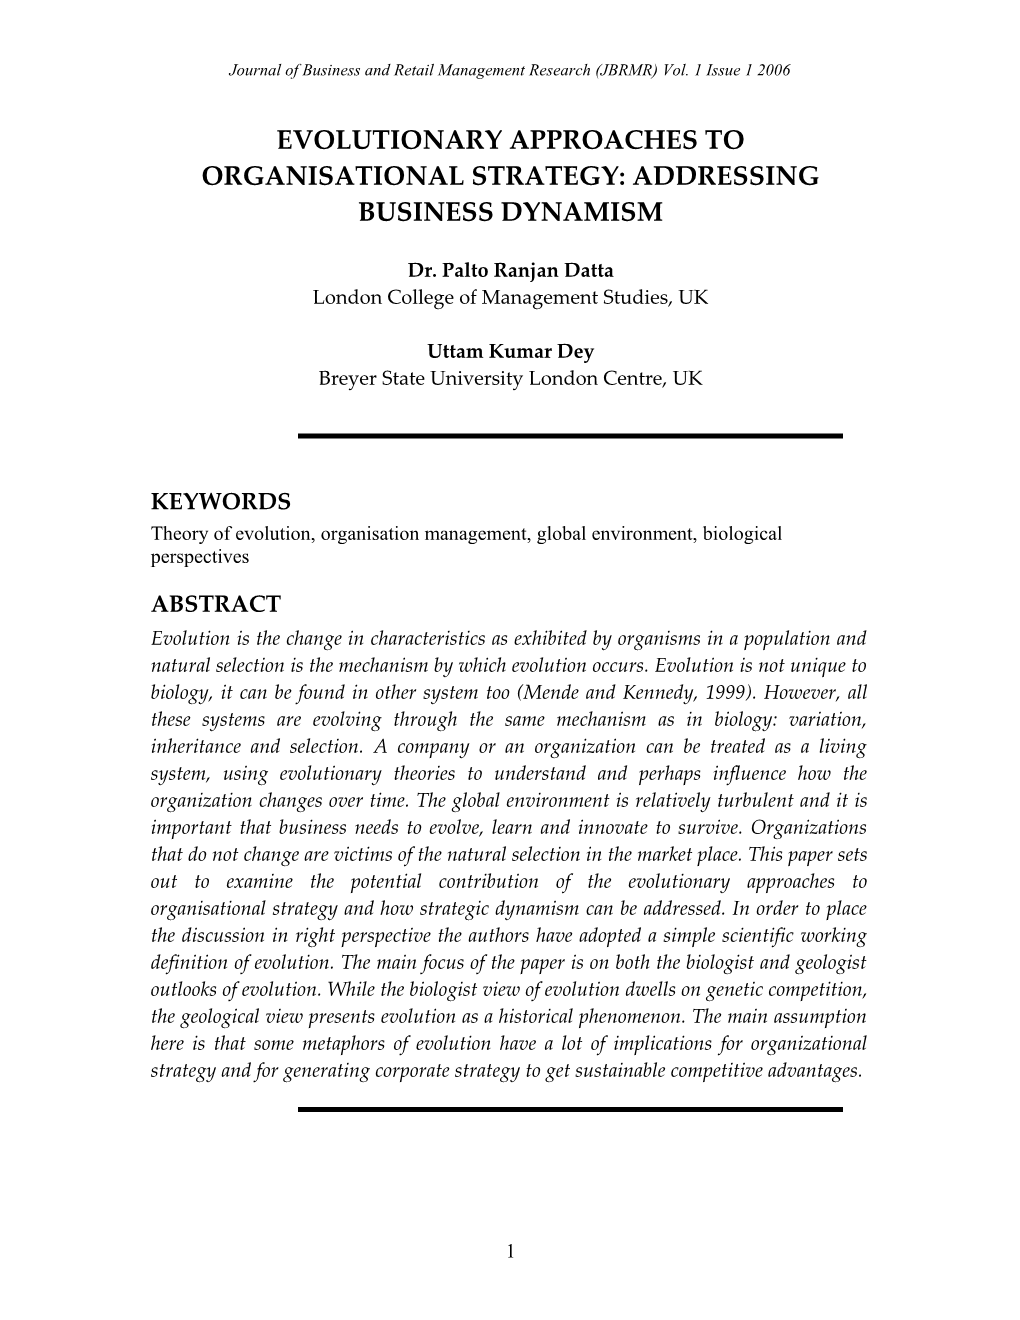 Evolutionary Approaches to Organisational Strategy: Addressing Business Dynamism